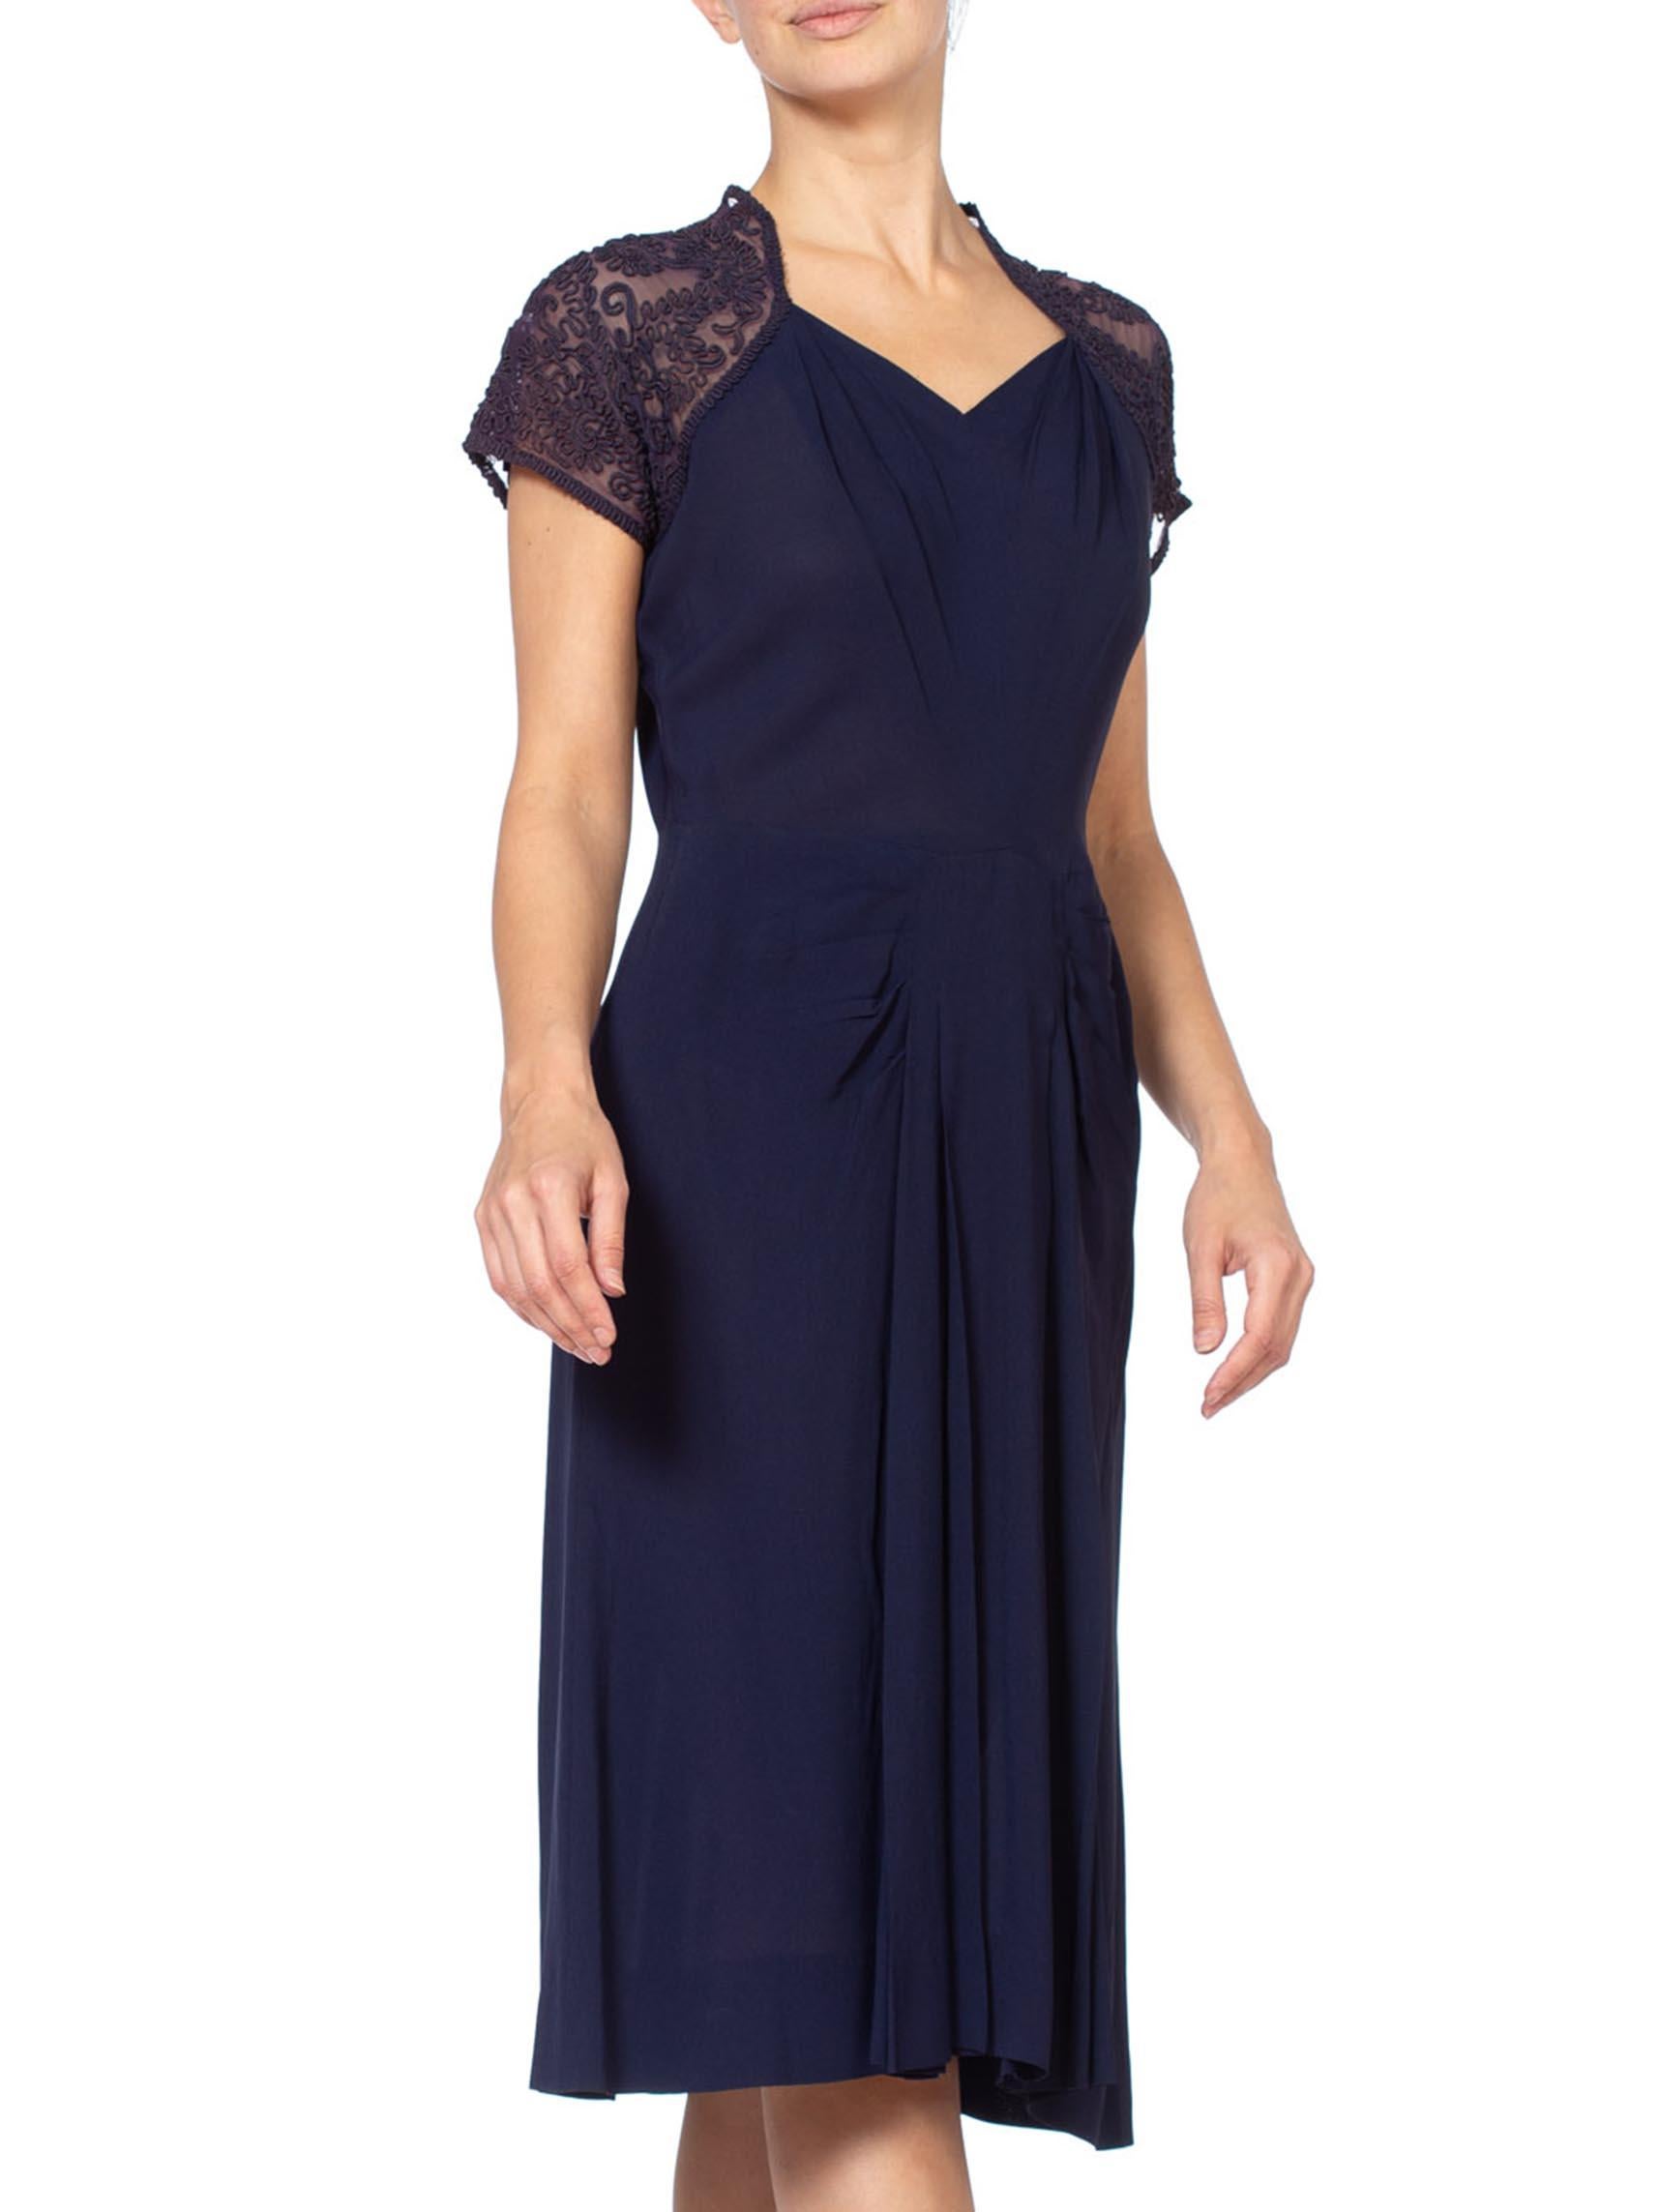 1940'S Navy Blue Rayon Crepe Dress With Embroidered Sheer Back For Sale 1